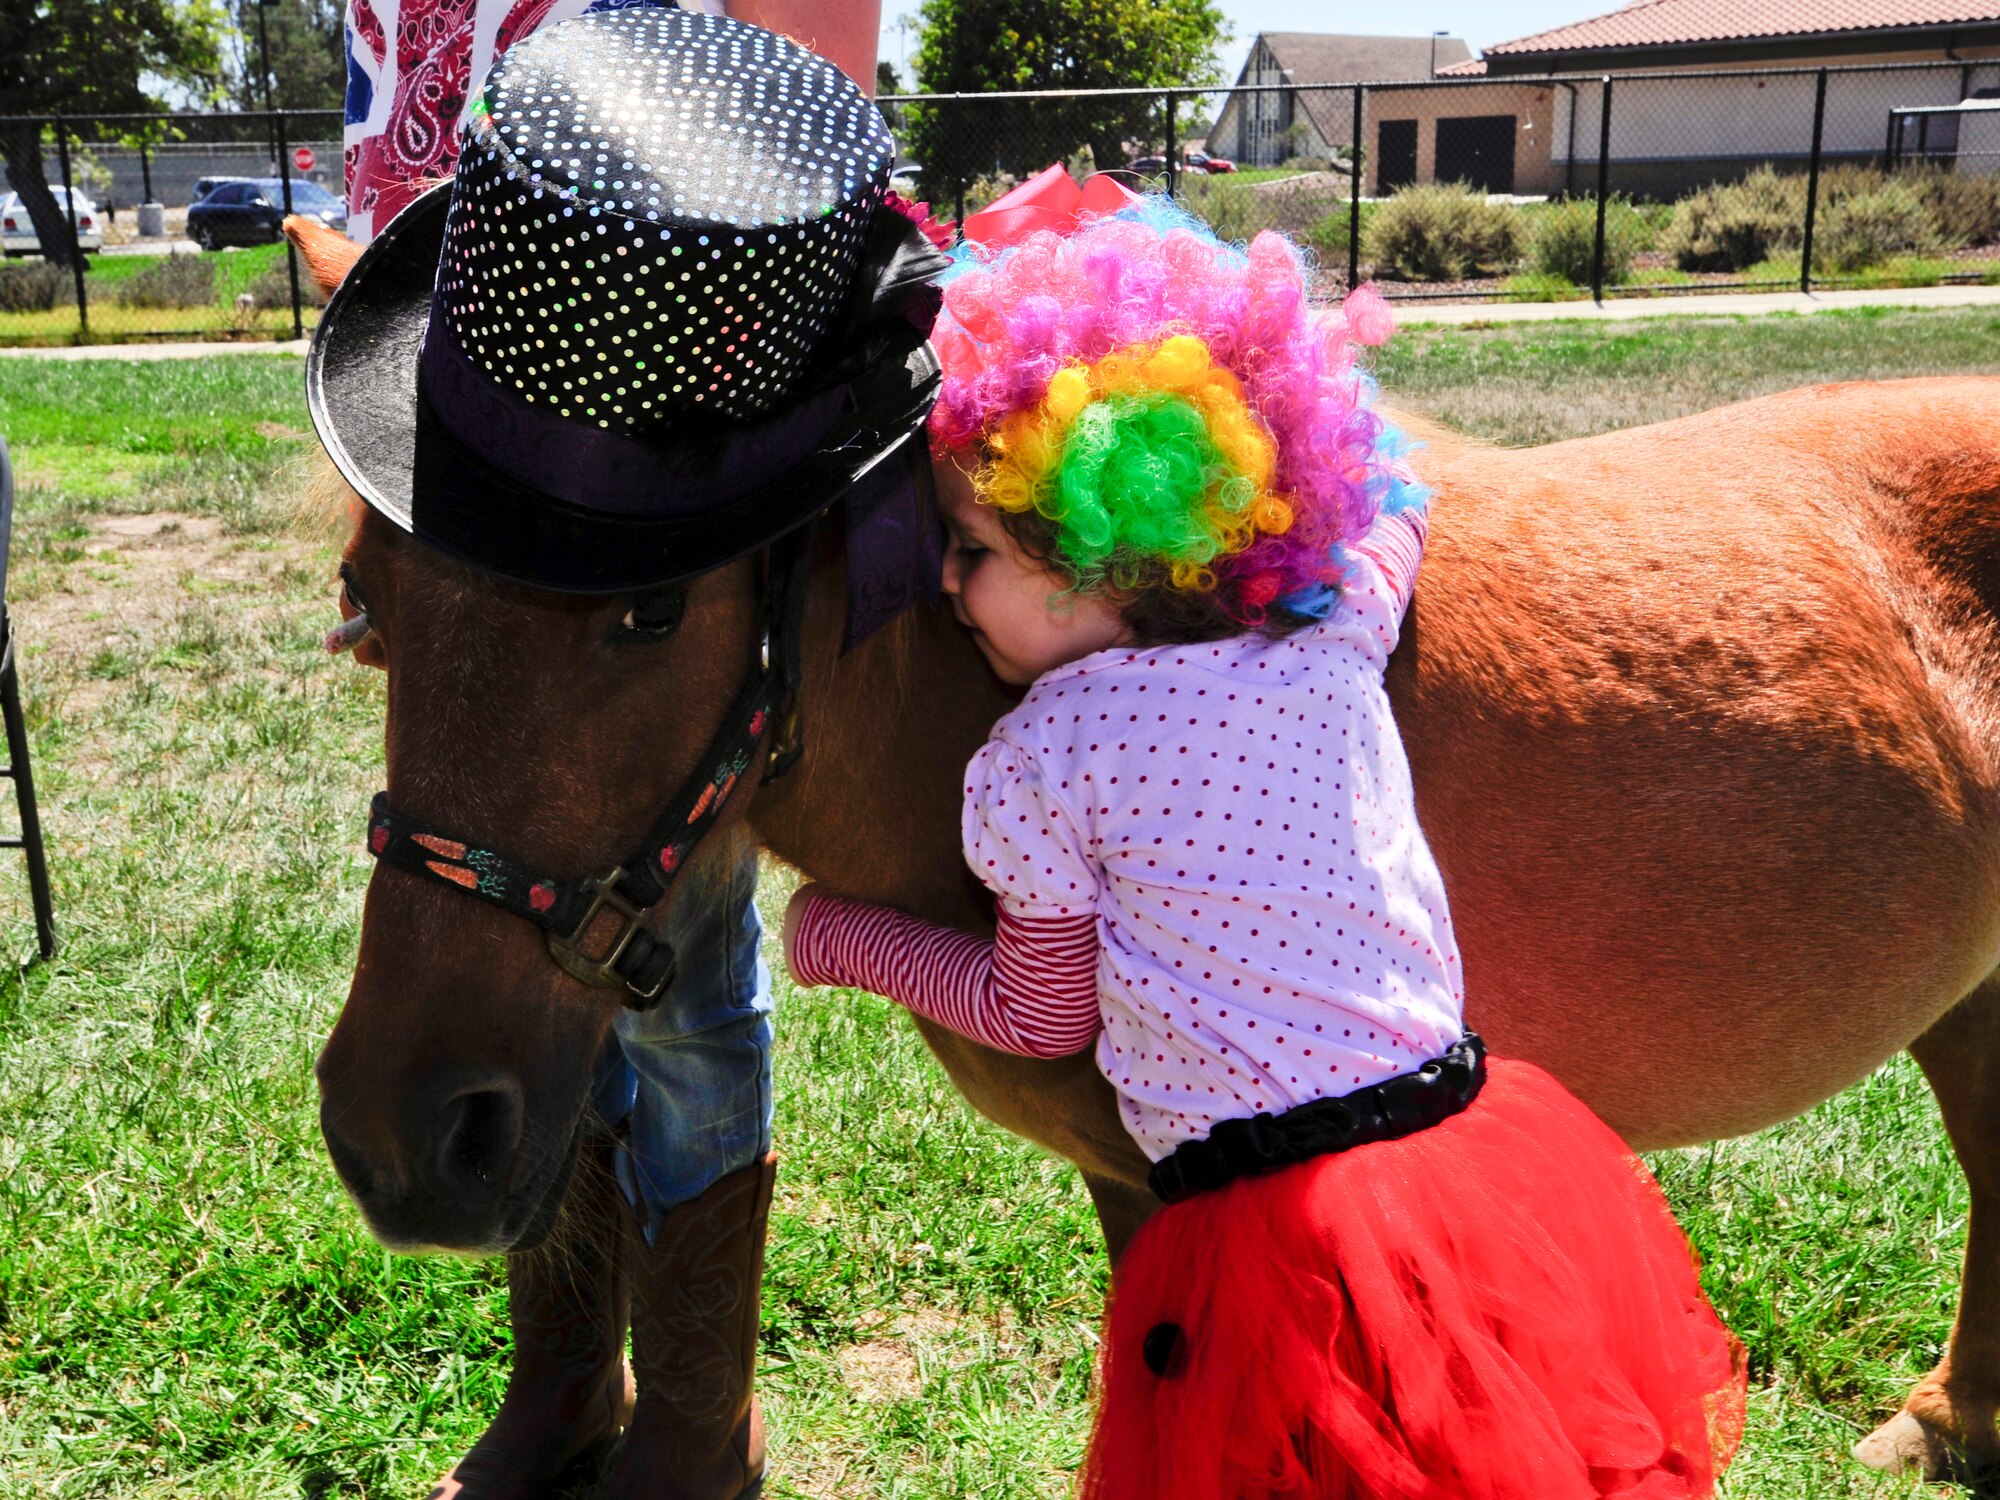 VANDENBERG AIR FORCE BASE, Calif. – Scout French hugs Teacup, a miniature horse from Santa Ynez Valley therapeutic riding program, during the 4th annual Salute to Youth event here Thursday, August 15, 2013. Salute to Youth was both an educational and family friendly event. It hosted the Exceptional Family Member Program, local schools, Backpack Brigade, food, games and prizes. (U.S. Air Force photo/Airman Yvonne Morales)